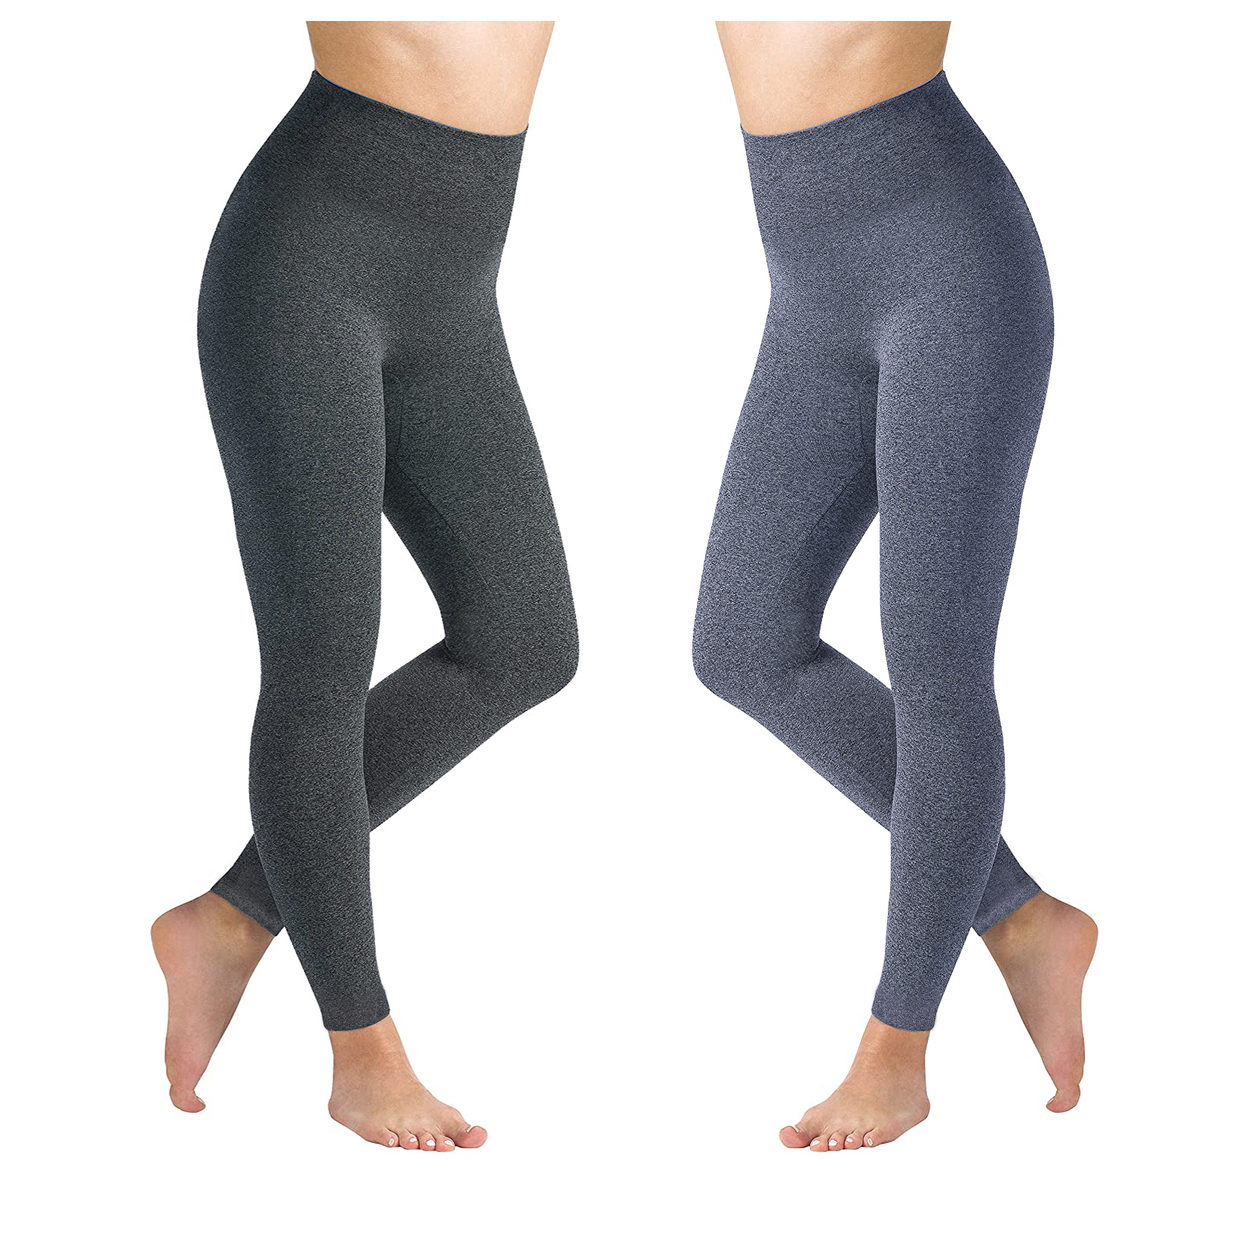 2-Pack: Women's High Waisted Ultra Soft Fleece Lined Warm Marled Leggings(Available In Plus Sizes) - Charcoal & Charcoal, X-large